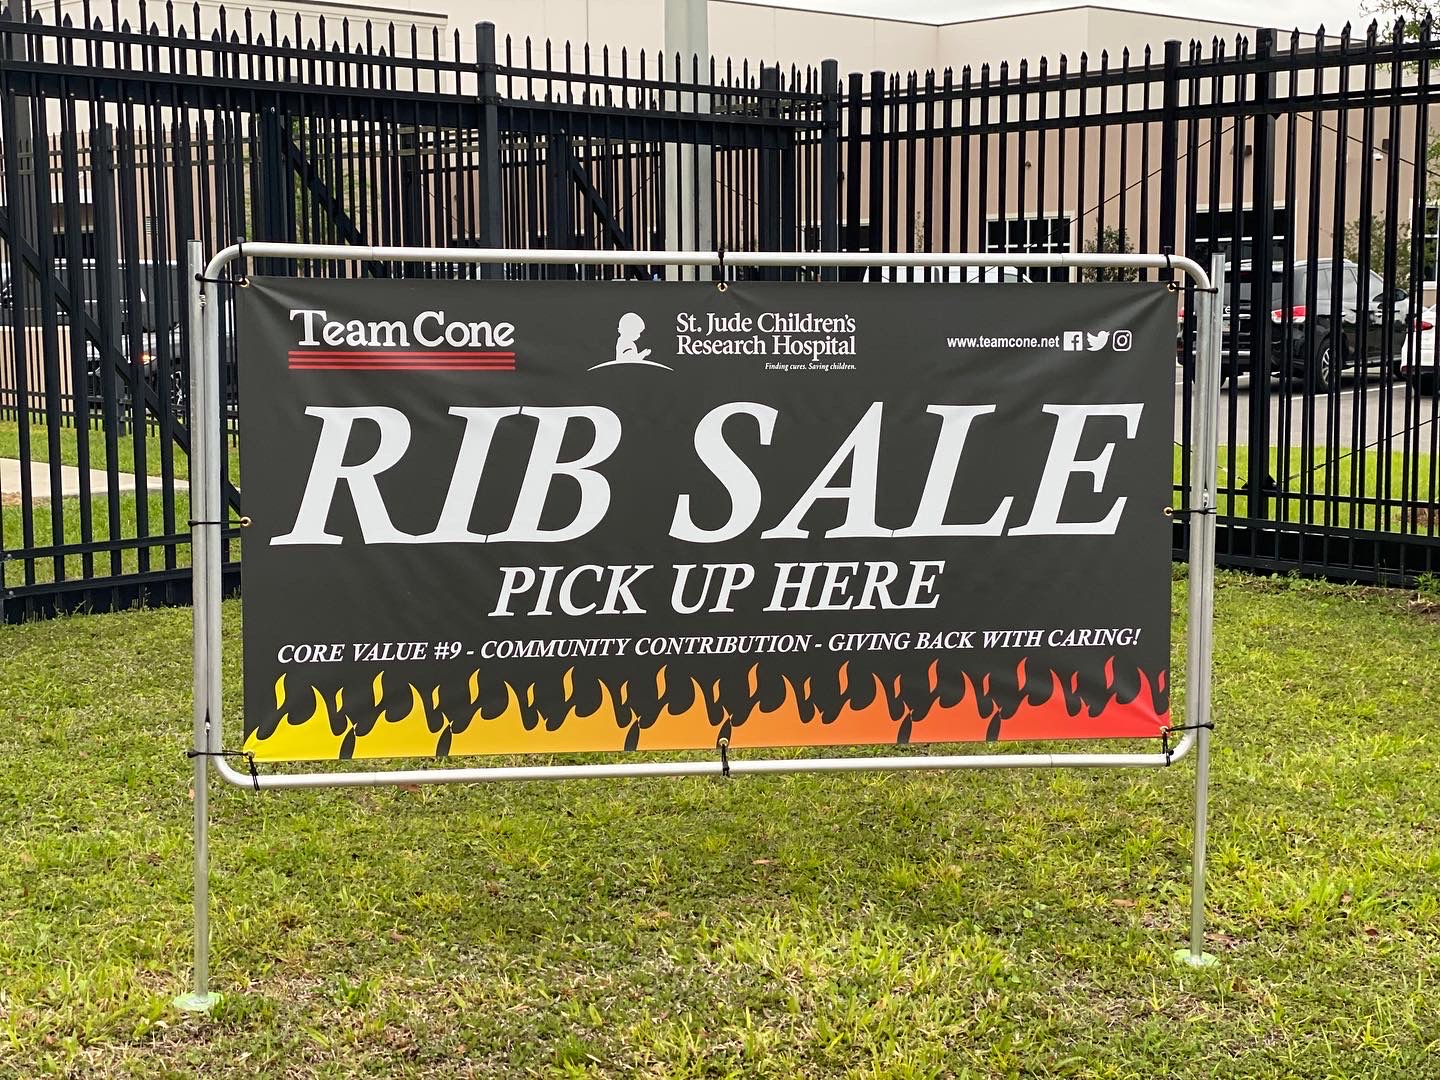 Team Cone hosted their twice-yearly Ocala Rib Sale